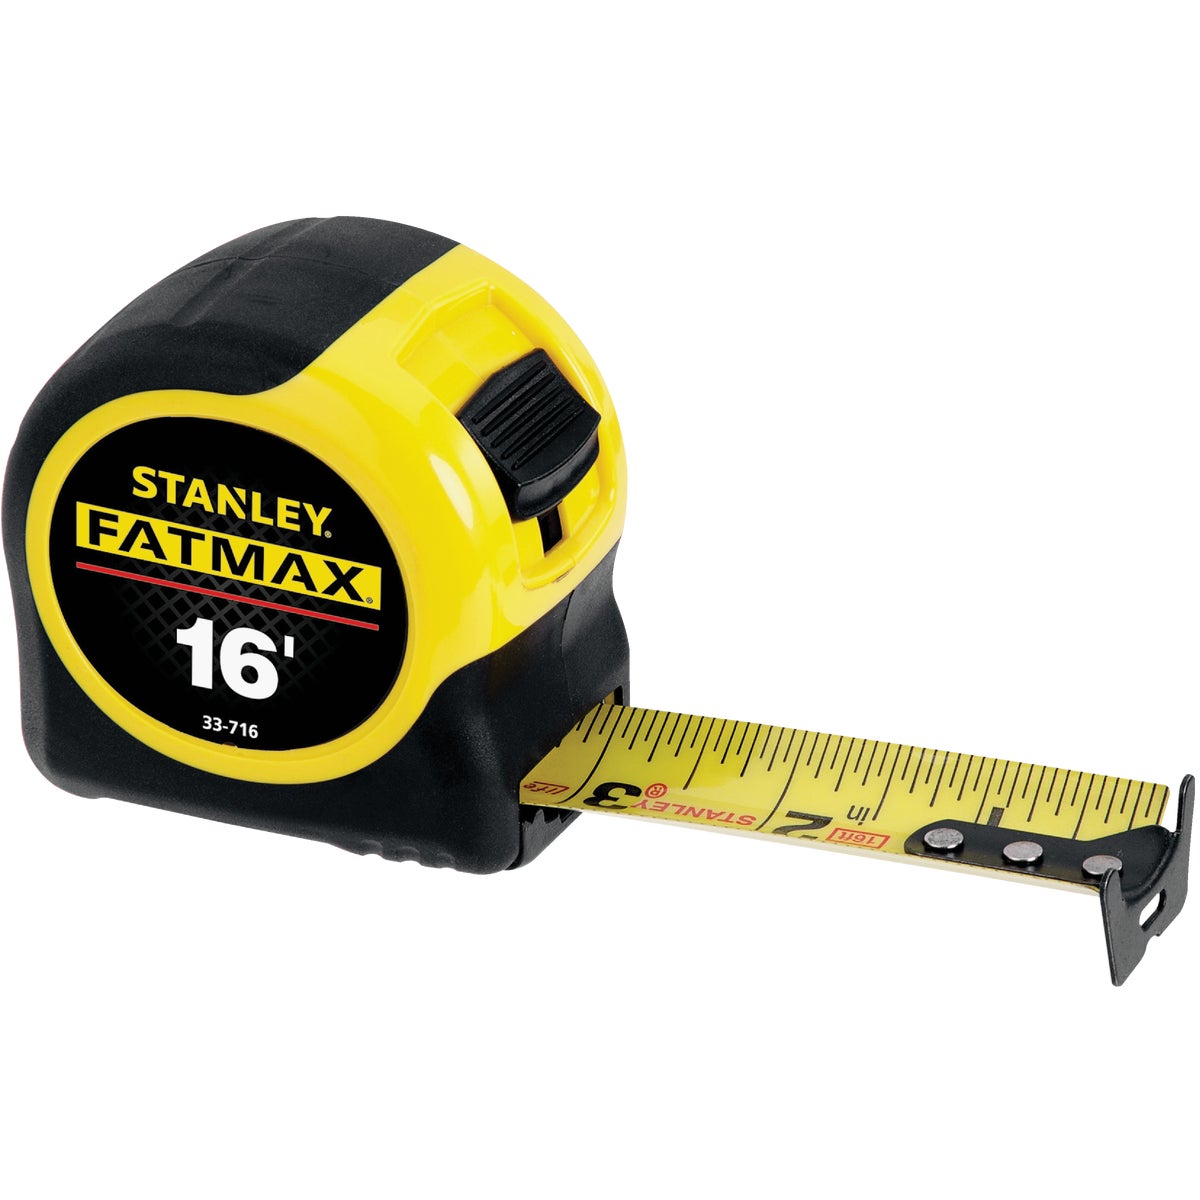 Item 357324, The Stanley FatMax 25 ft.